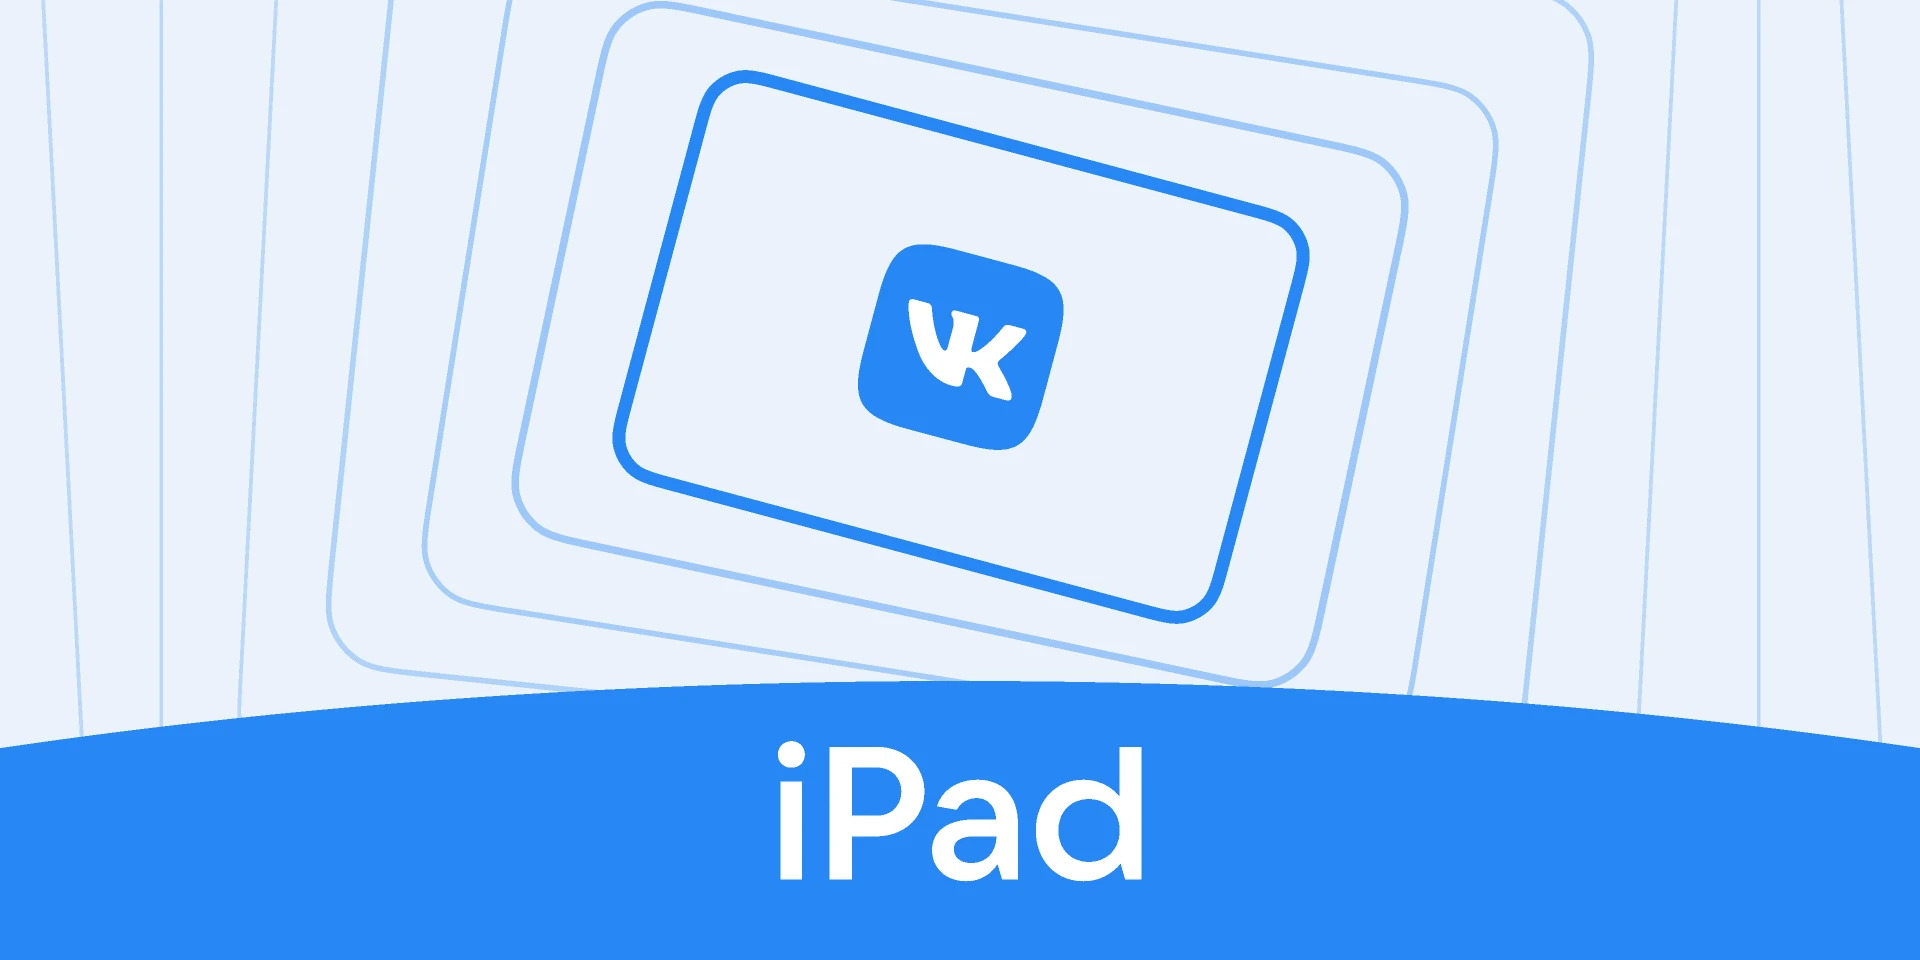 VK App for iPad for Figma and Adobe XD